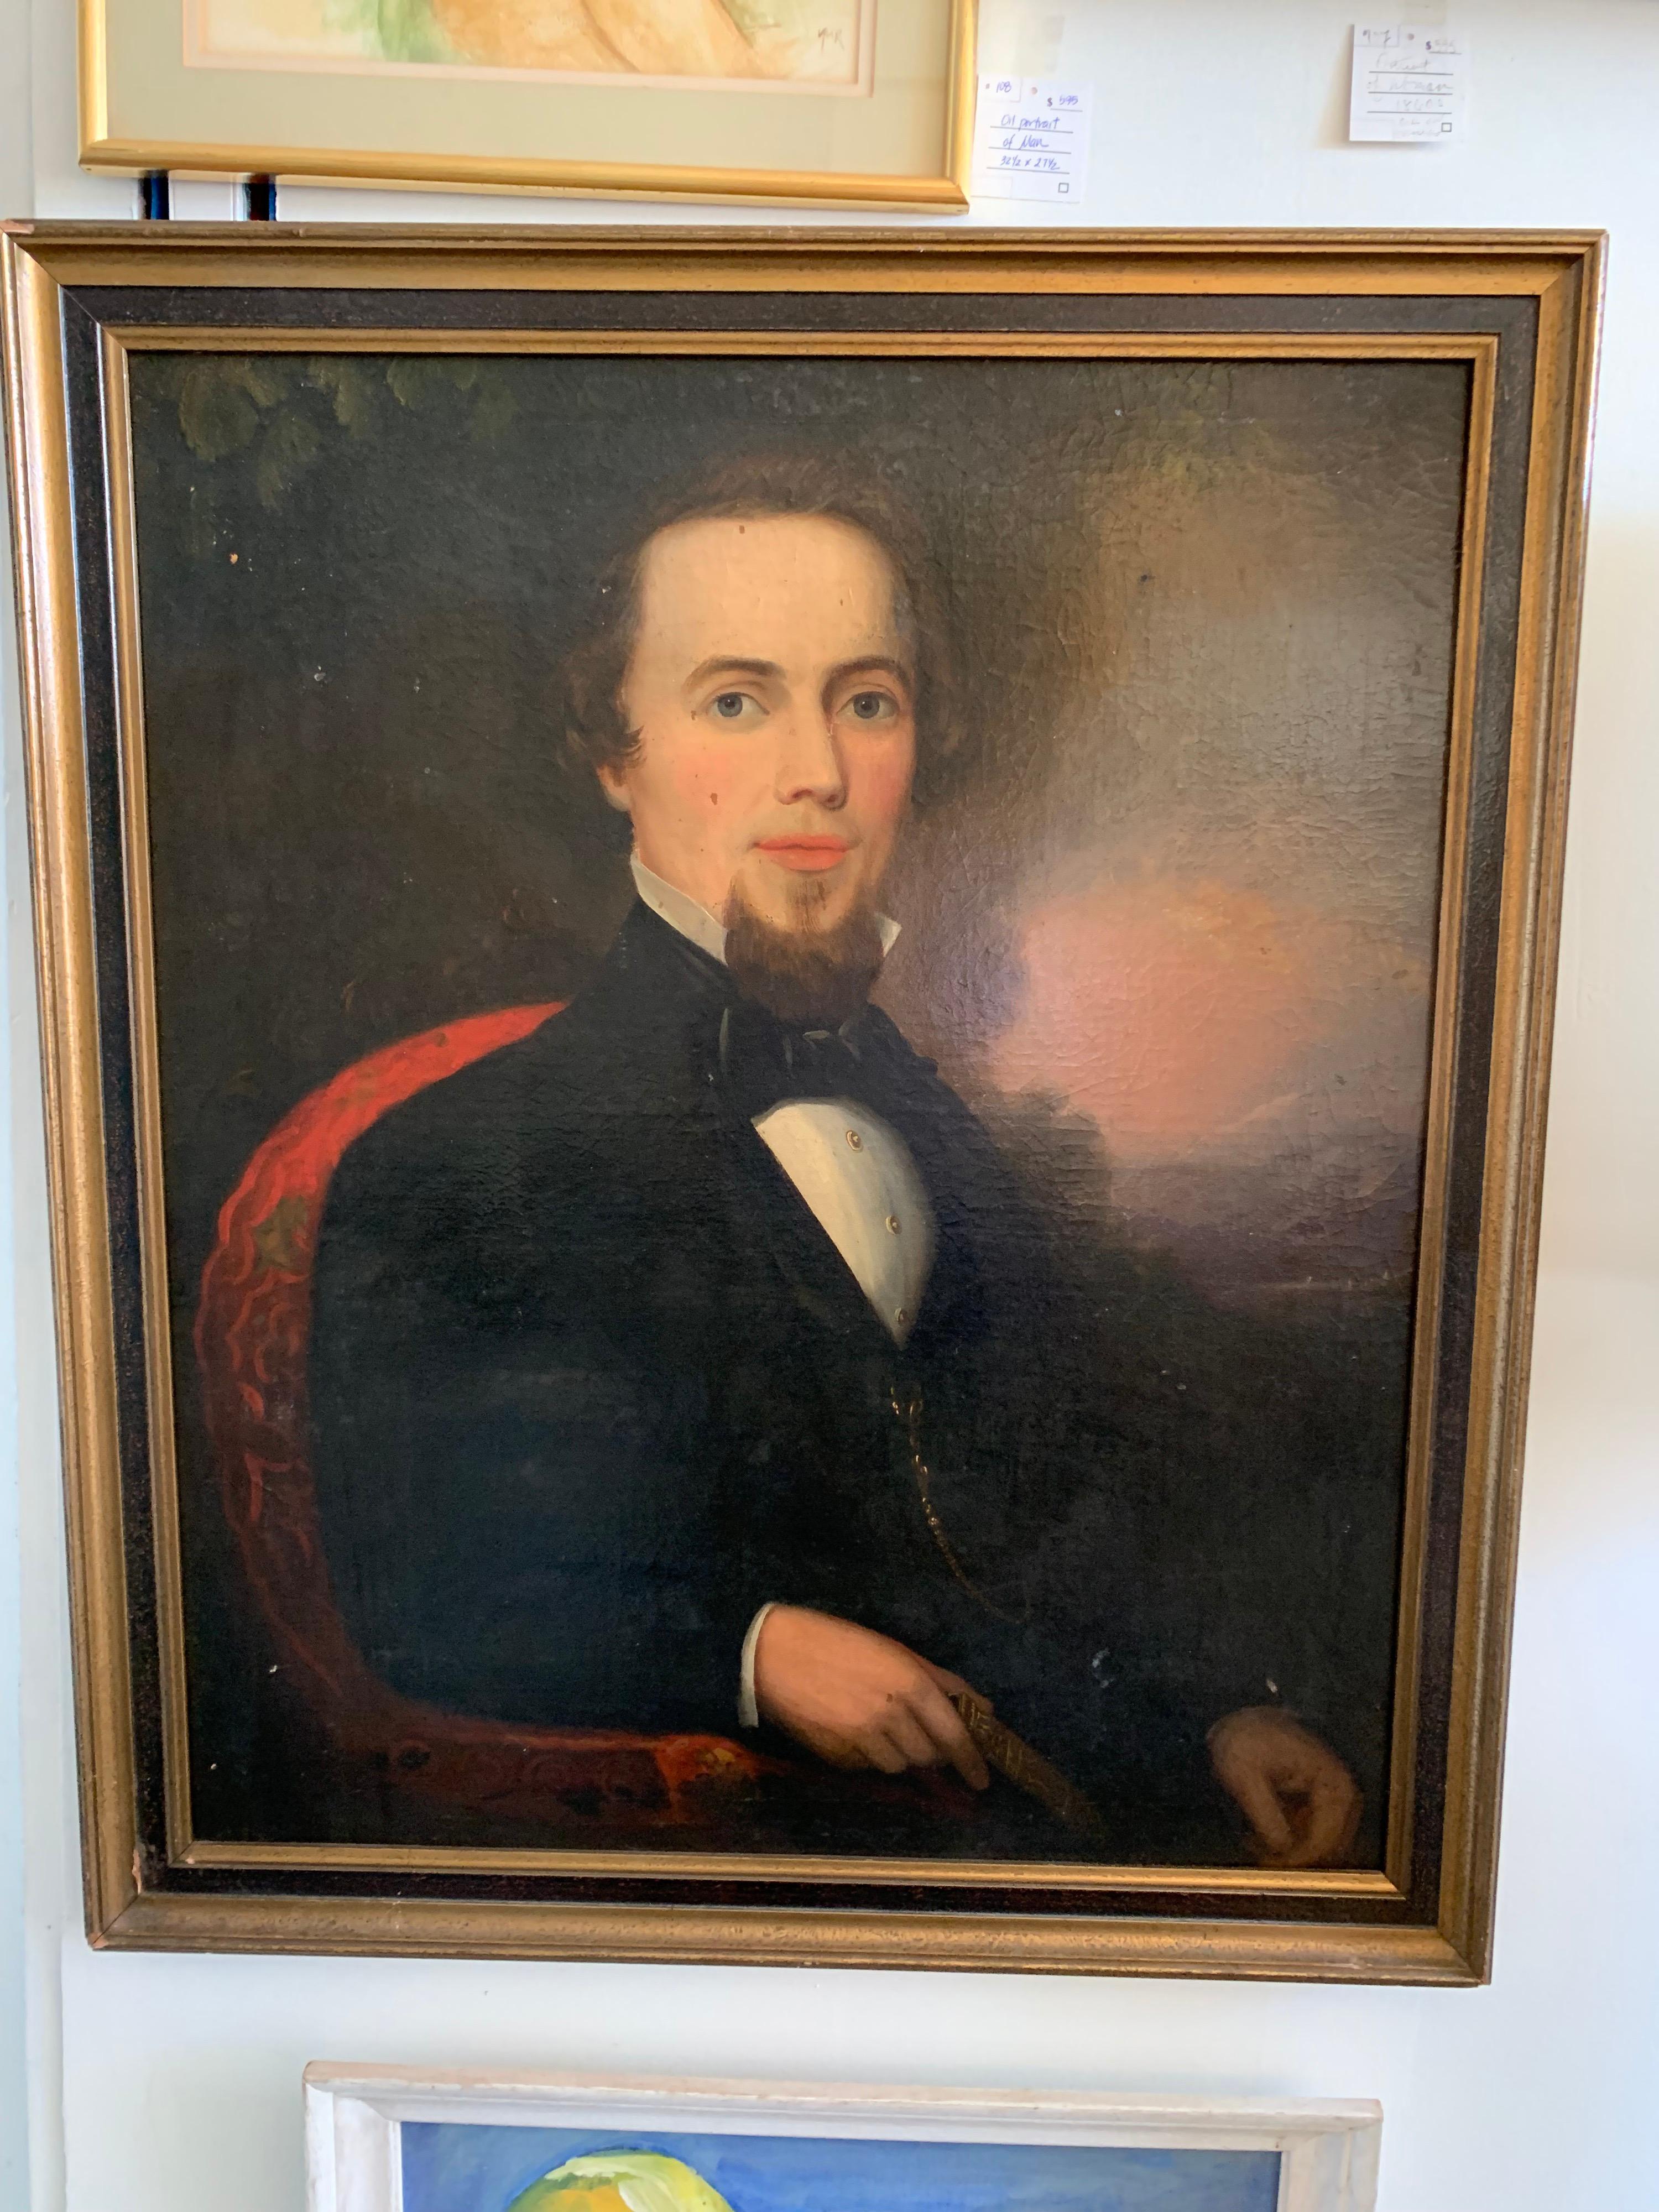 Old original oil painting on board portrait of a man in a black jacket holding a book and seated on a red chair. Unsigned, circa mid-19th century and displayed in a gold gilt frame.